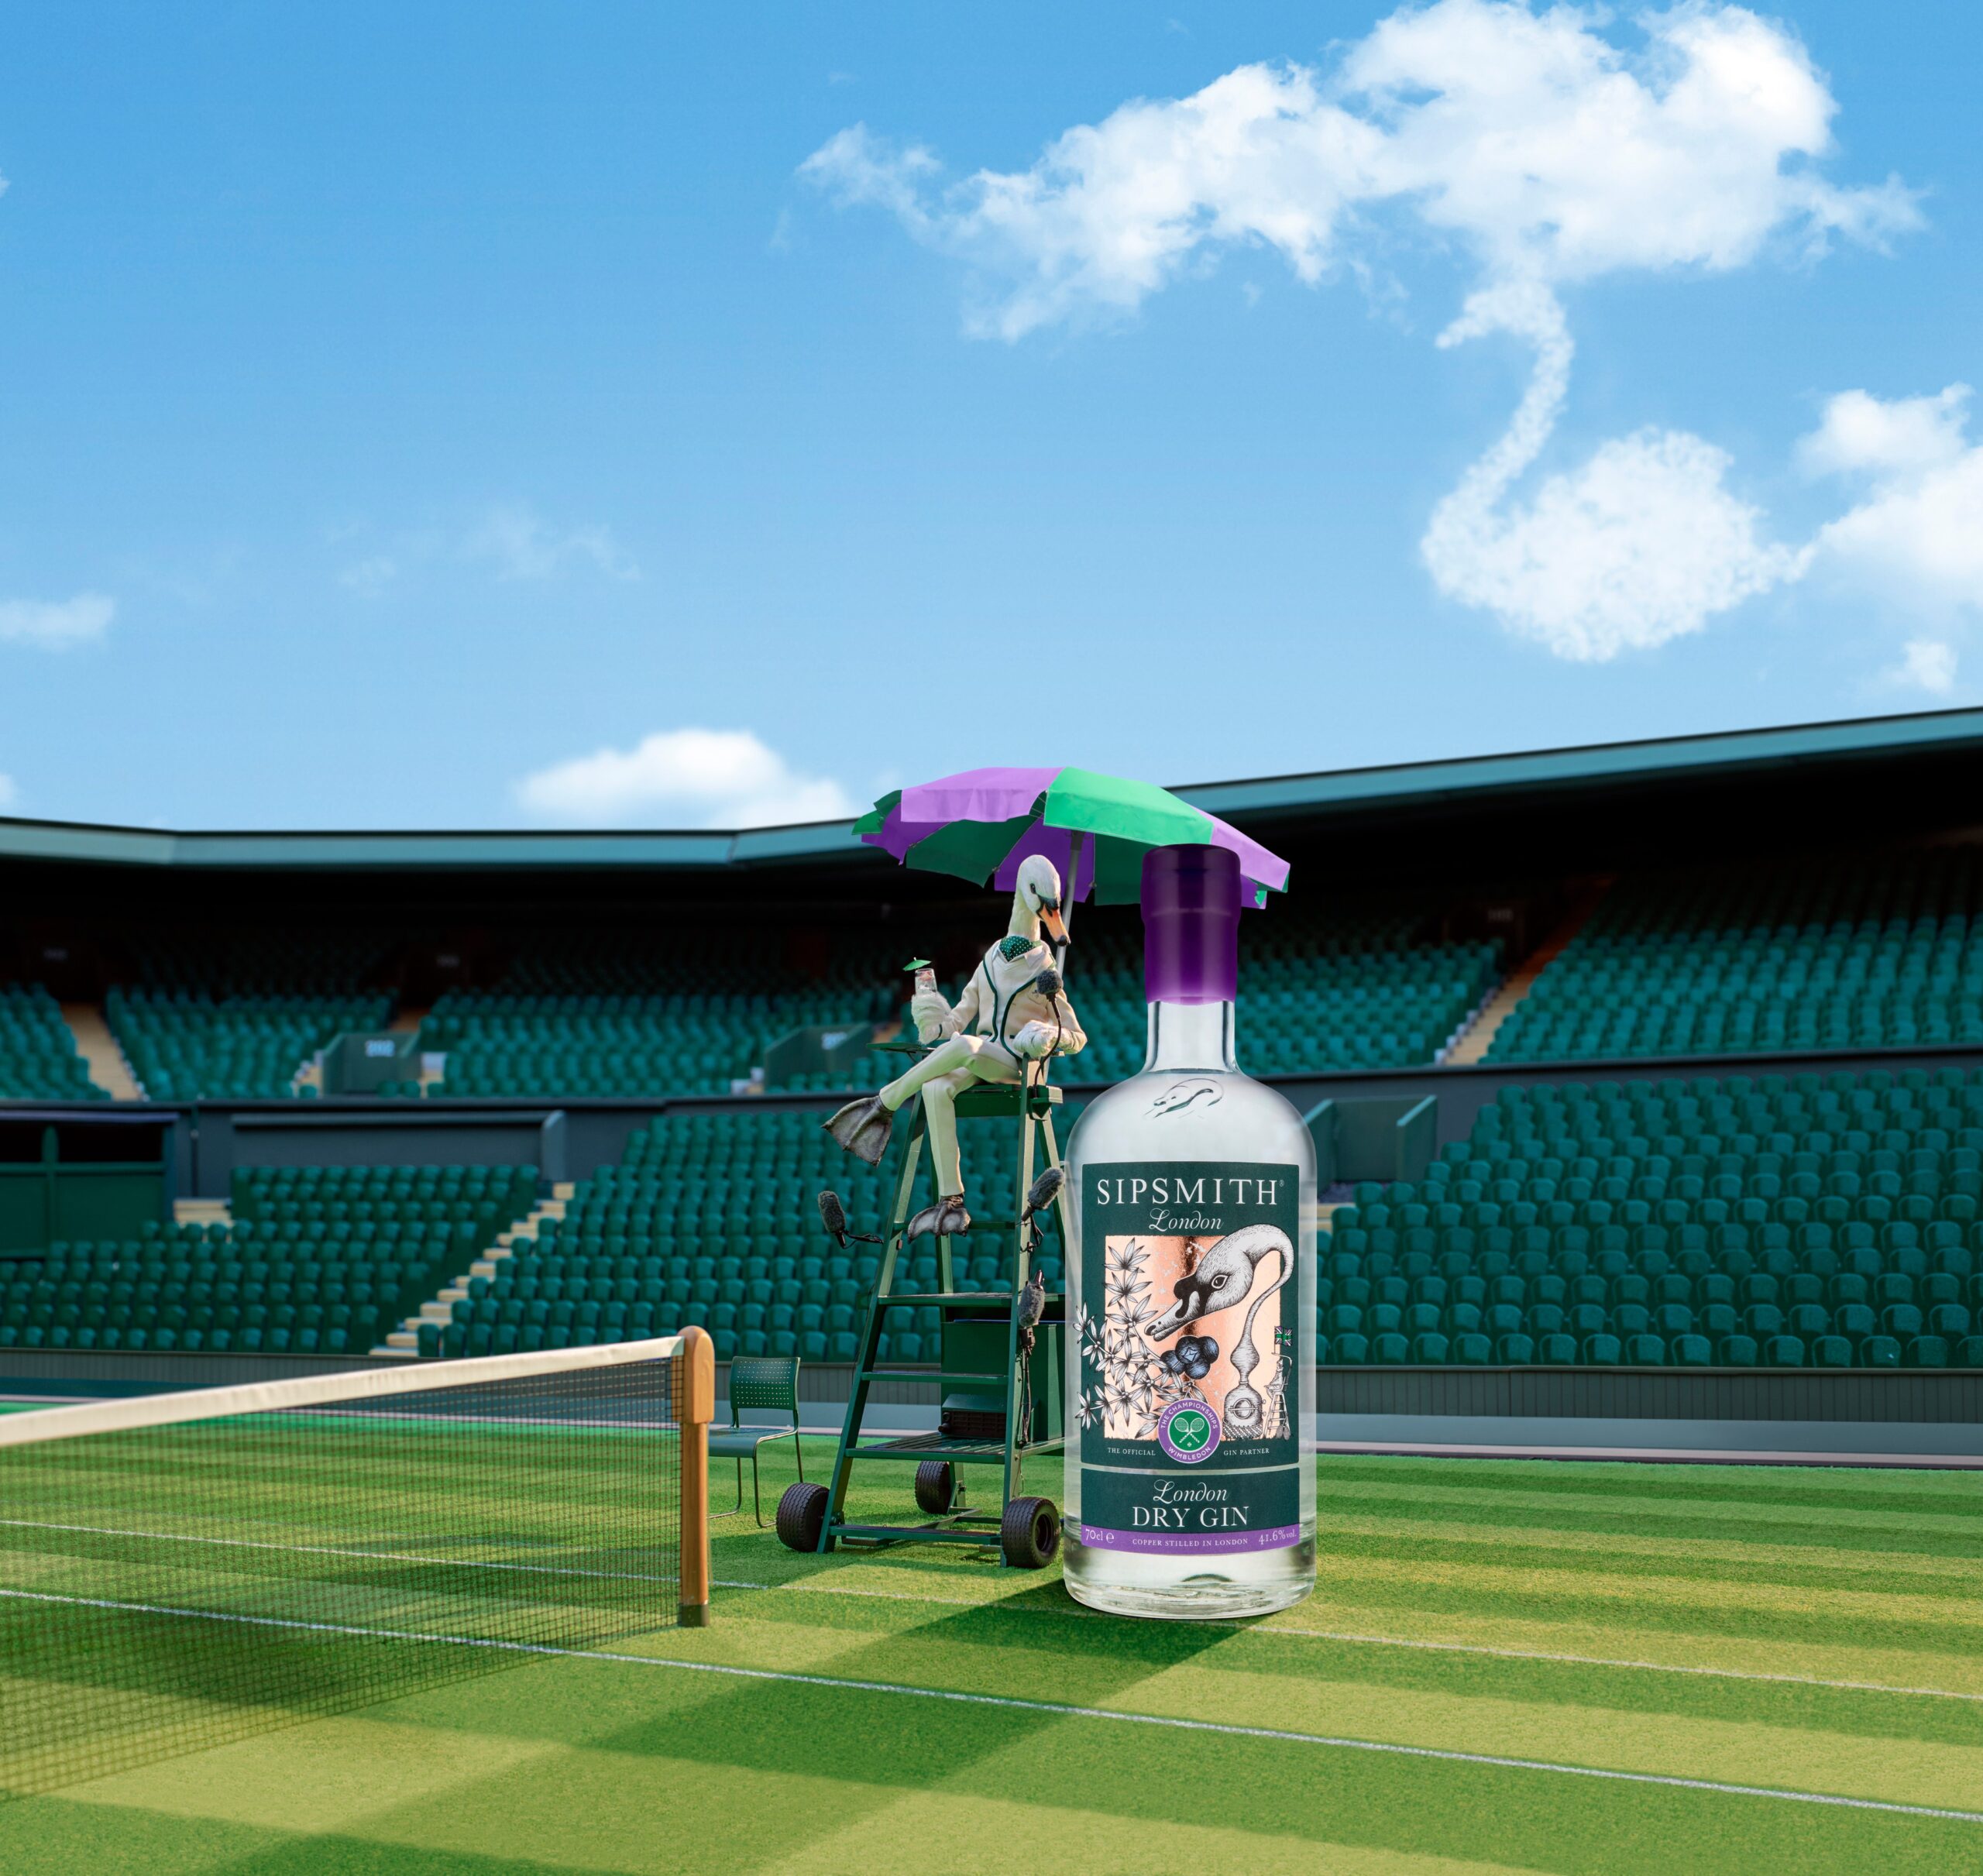 Wimbledon-sipsmith-gin-tapestry-soho-retouching-summer-alcohol-sport-tennis-tournament-annual-london-celebration-production-agency
